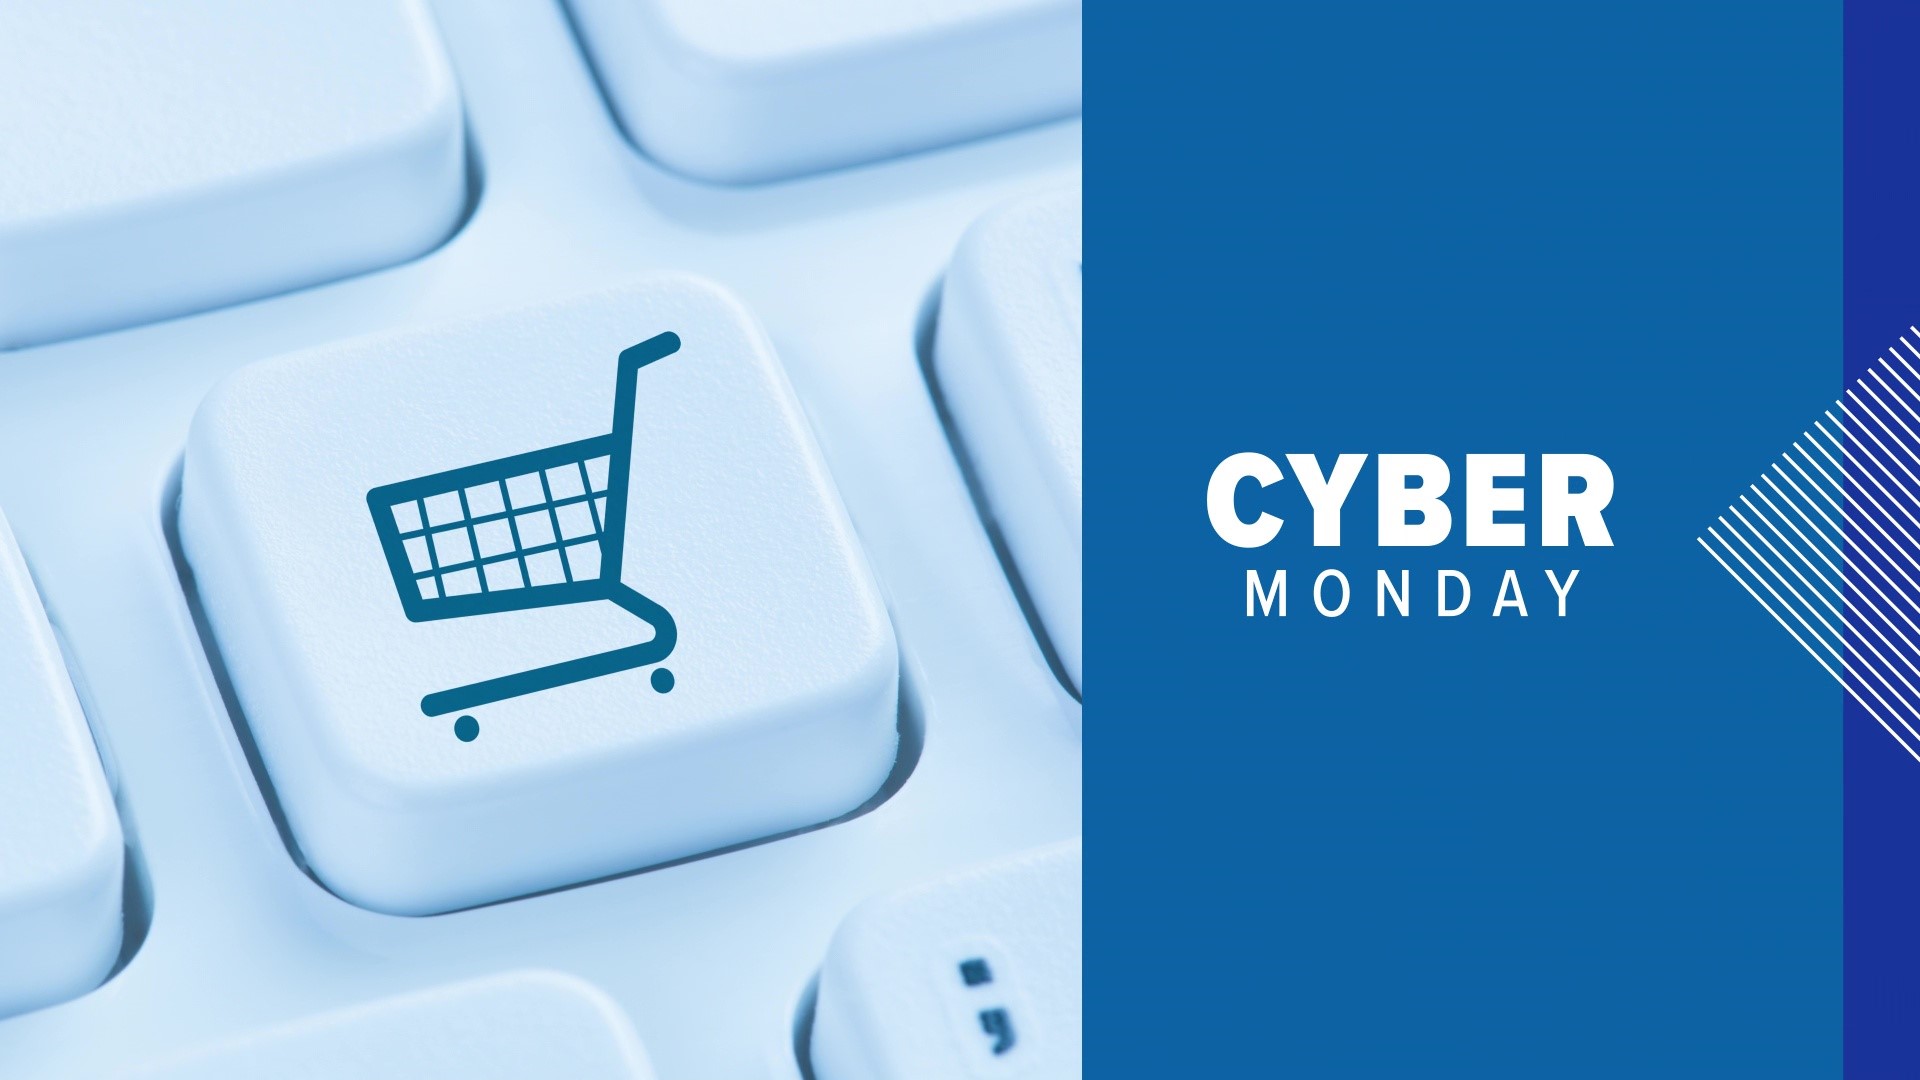 Cyber Monday has arrived, and there are tons of bargains on the internet to entice holiday shoppers, but there are some things to look out for when shopping online.